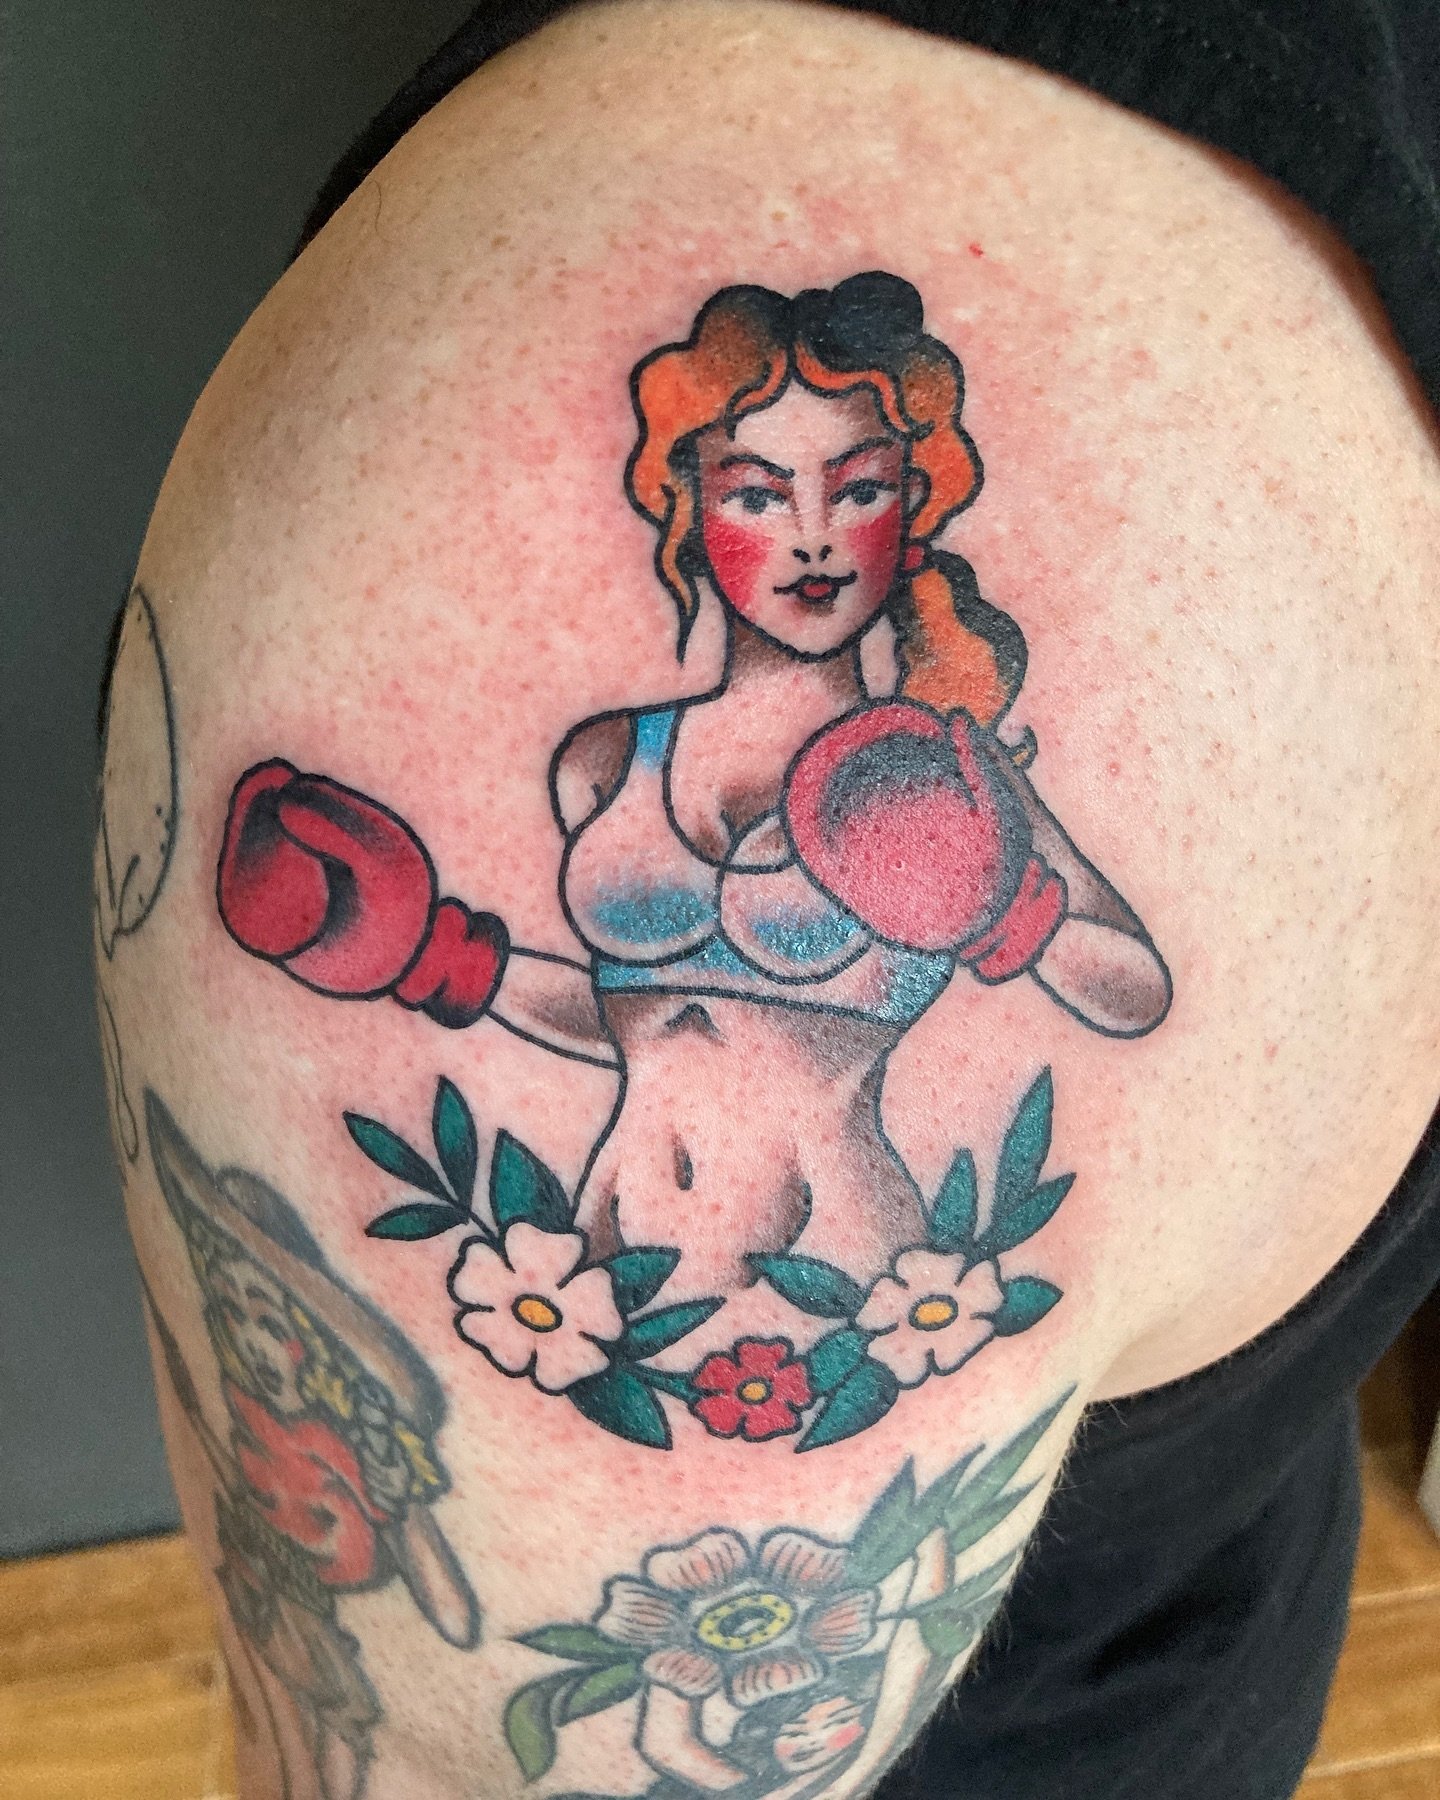 Boxer babe done by @sashatwoo at Obscura

#tattoos #tattoo #boxertattoo #traditionaltattoo #americantraditionaltattoo #colortattoo #ottawa #ottawaartist #ottawaart